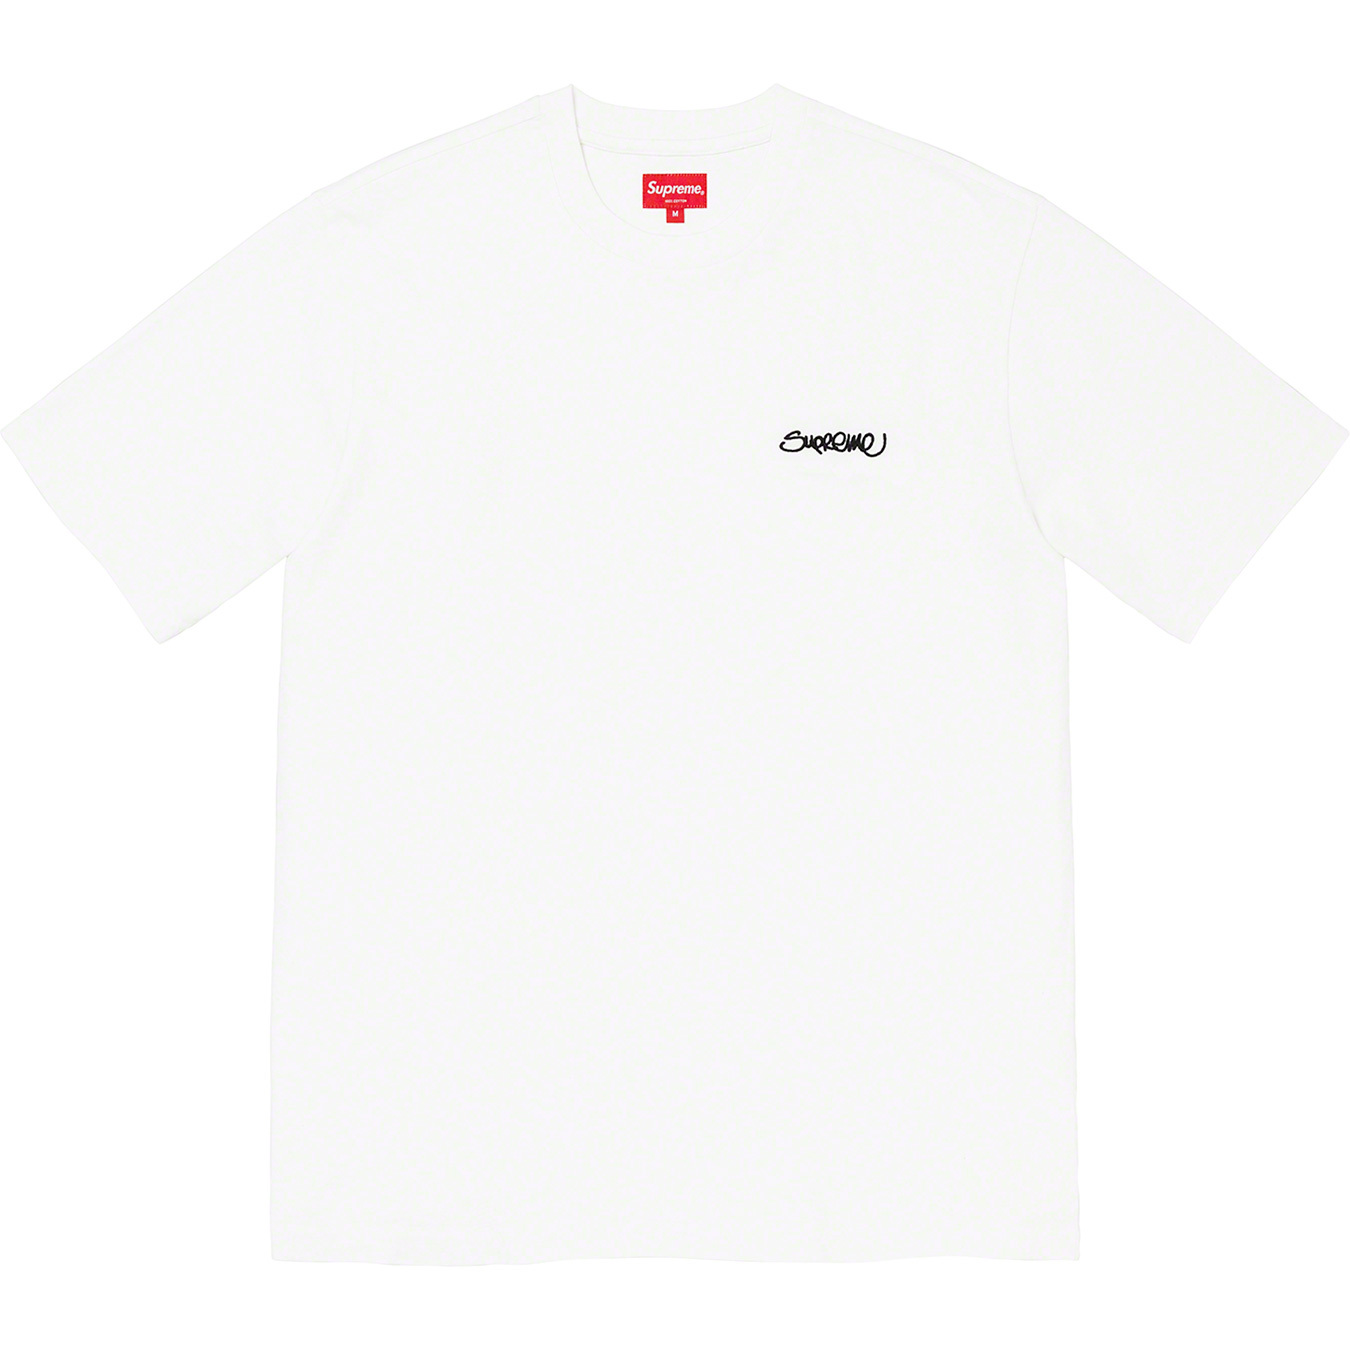 Supreme Washed Handstyle S/S Top